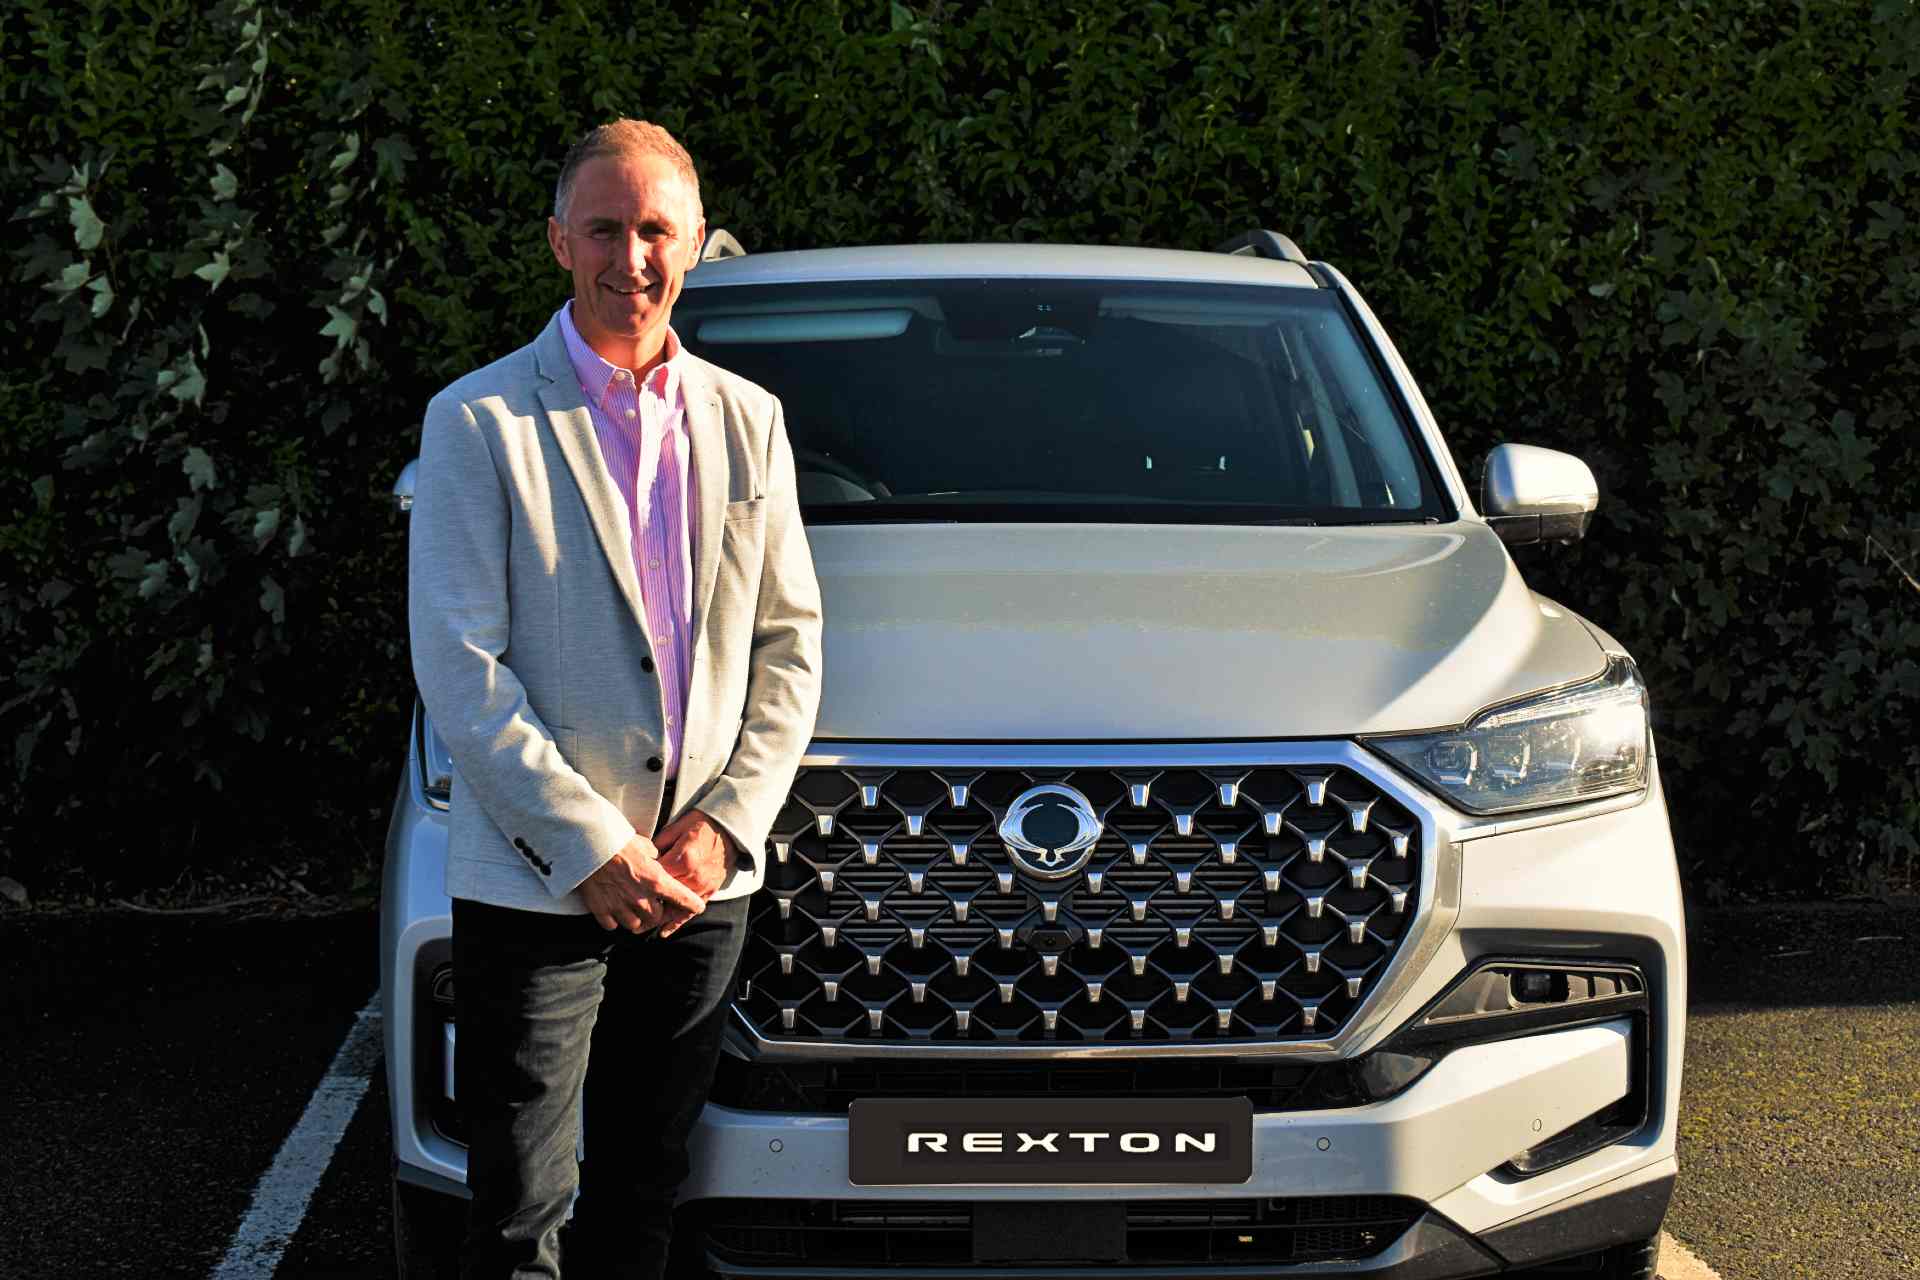 Clive Messenger joins SsangYong